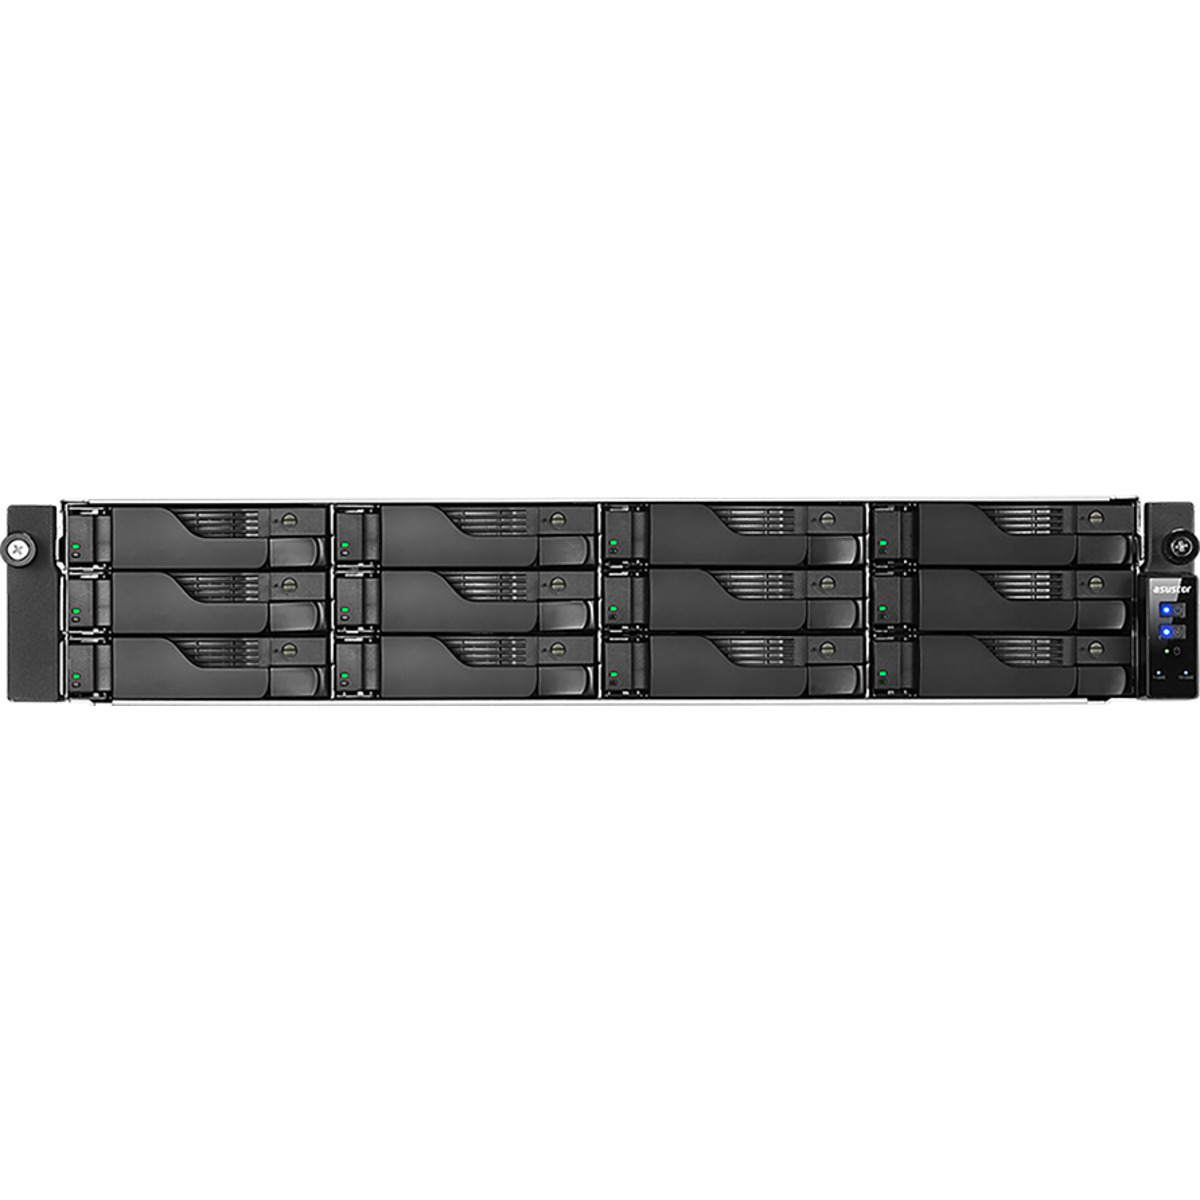 ASUSTOR LOCKERSTOR 12RD AS6512RD 176tb 12-Bay RackMount Multimedia / Power User / Business NAS - Network Attached Storage Device 8x22tb Western Digital Gold WD221KRYZ 3.5 7200rpm SATA 6Gb/s HDD ENTERPRISE Class Drives Installed - Burn-In Tested - FREE RAM UPGRADE LOCKERSTOR 12RD AS6512RD